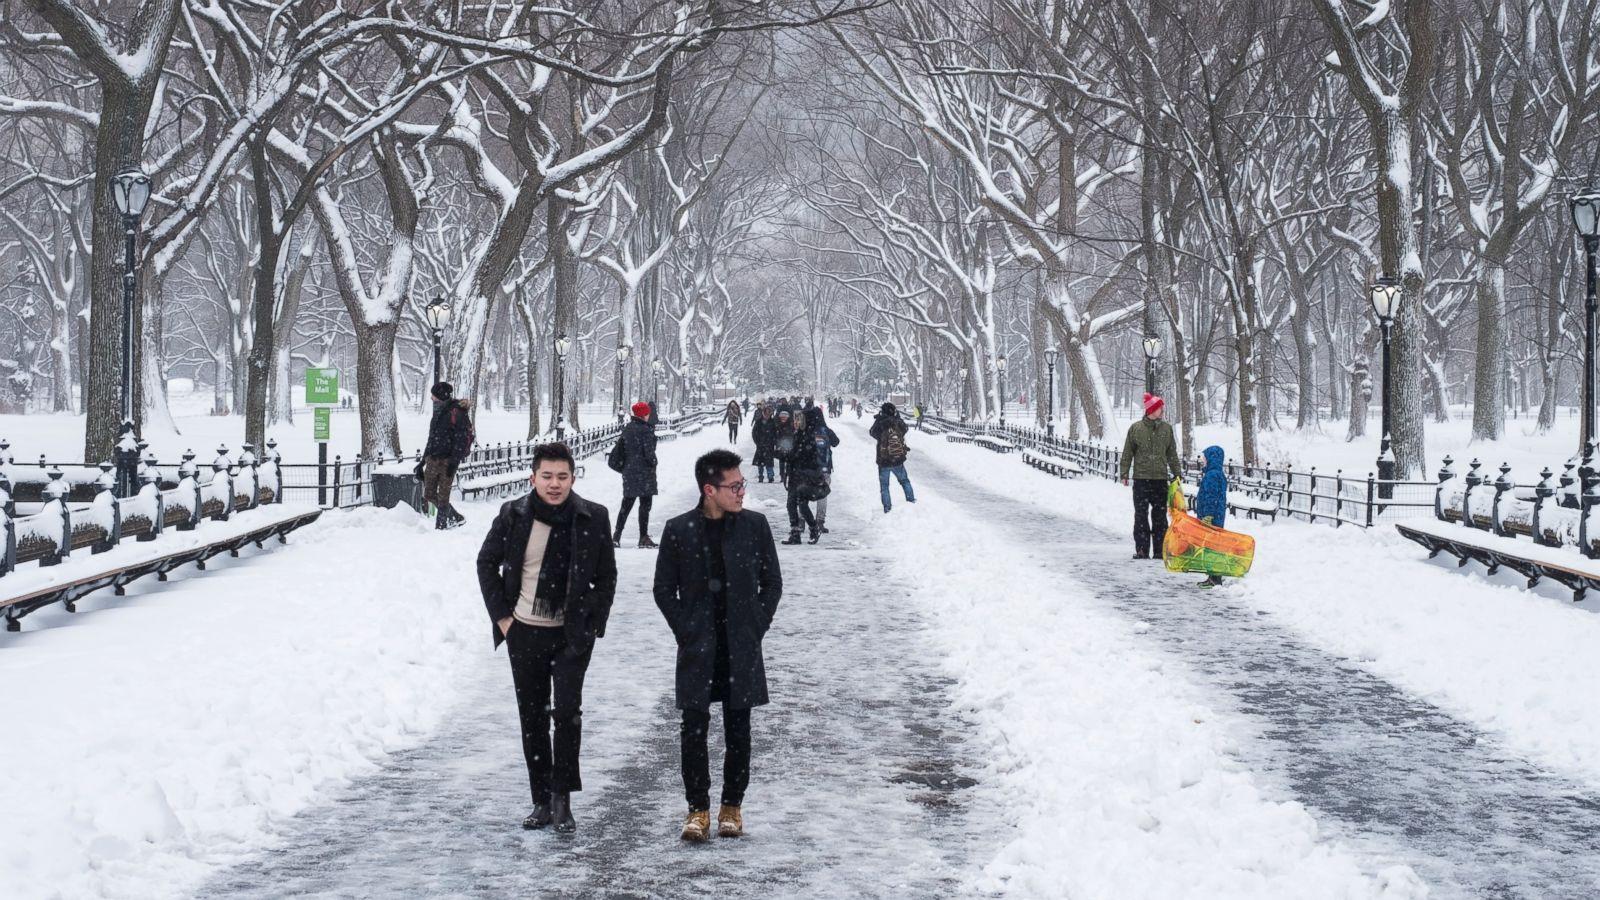 Videos Capture Snowy Scenes in New York's Central Park